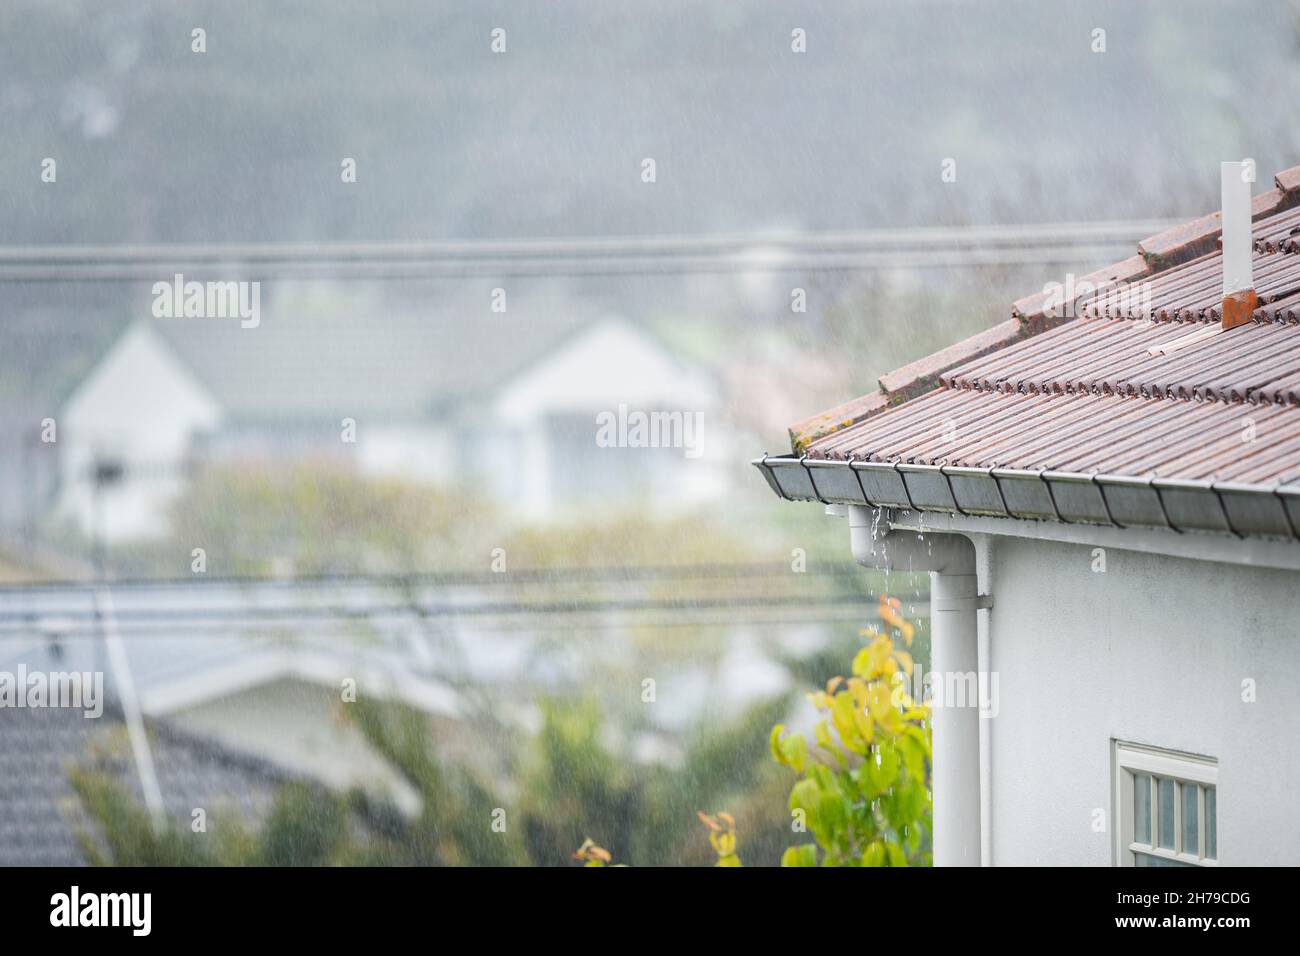 Roof gutter overflow in the rain. Visible raindrops against out-of-focus houses in the background. Stock Photo